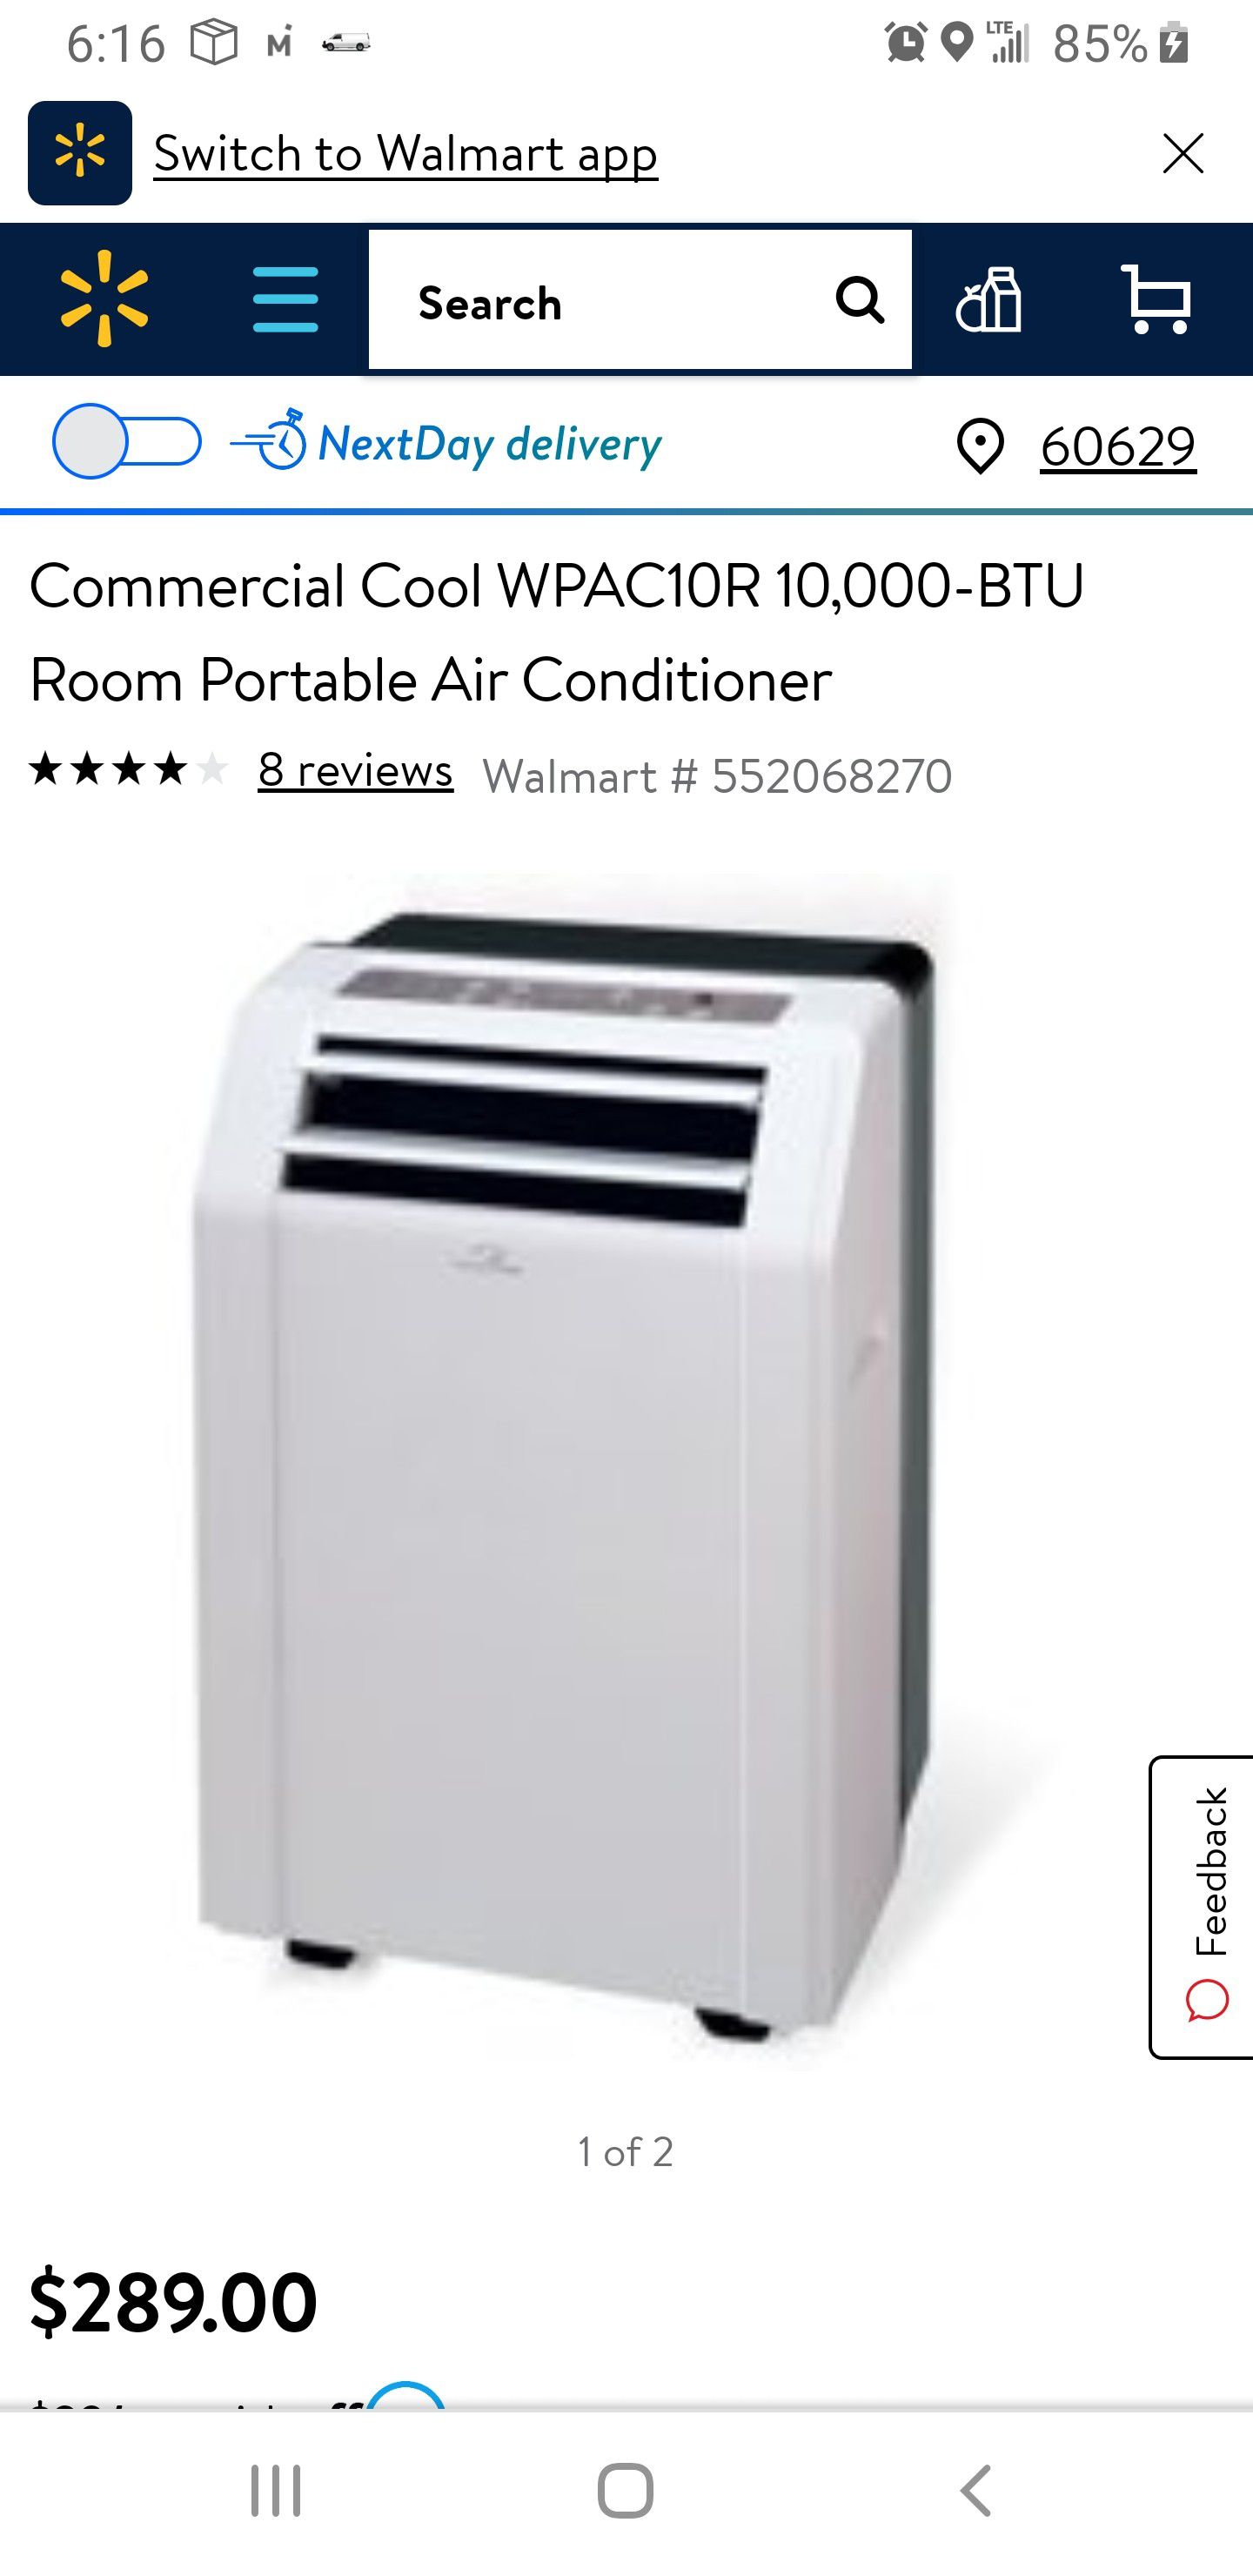 Commercial Cool WPAC10R 10,000-BTU Room Portable Air Conditioner